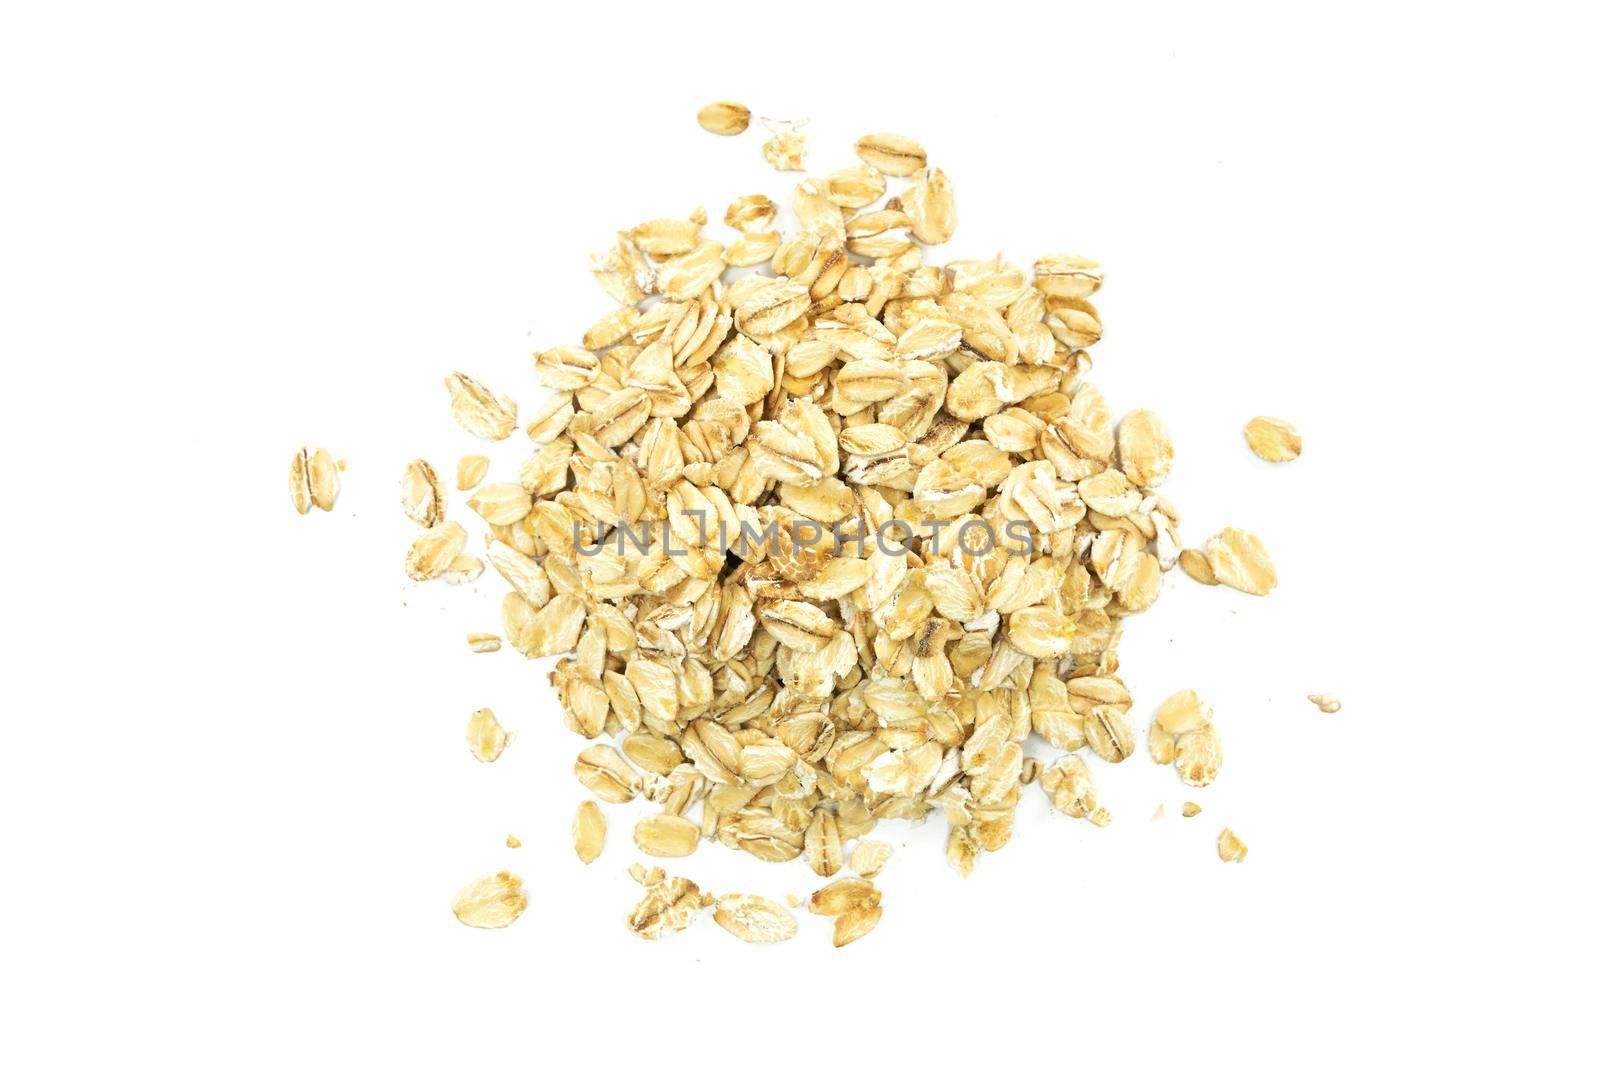 Top view of oatmeal flakes on a white background